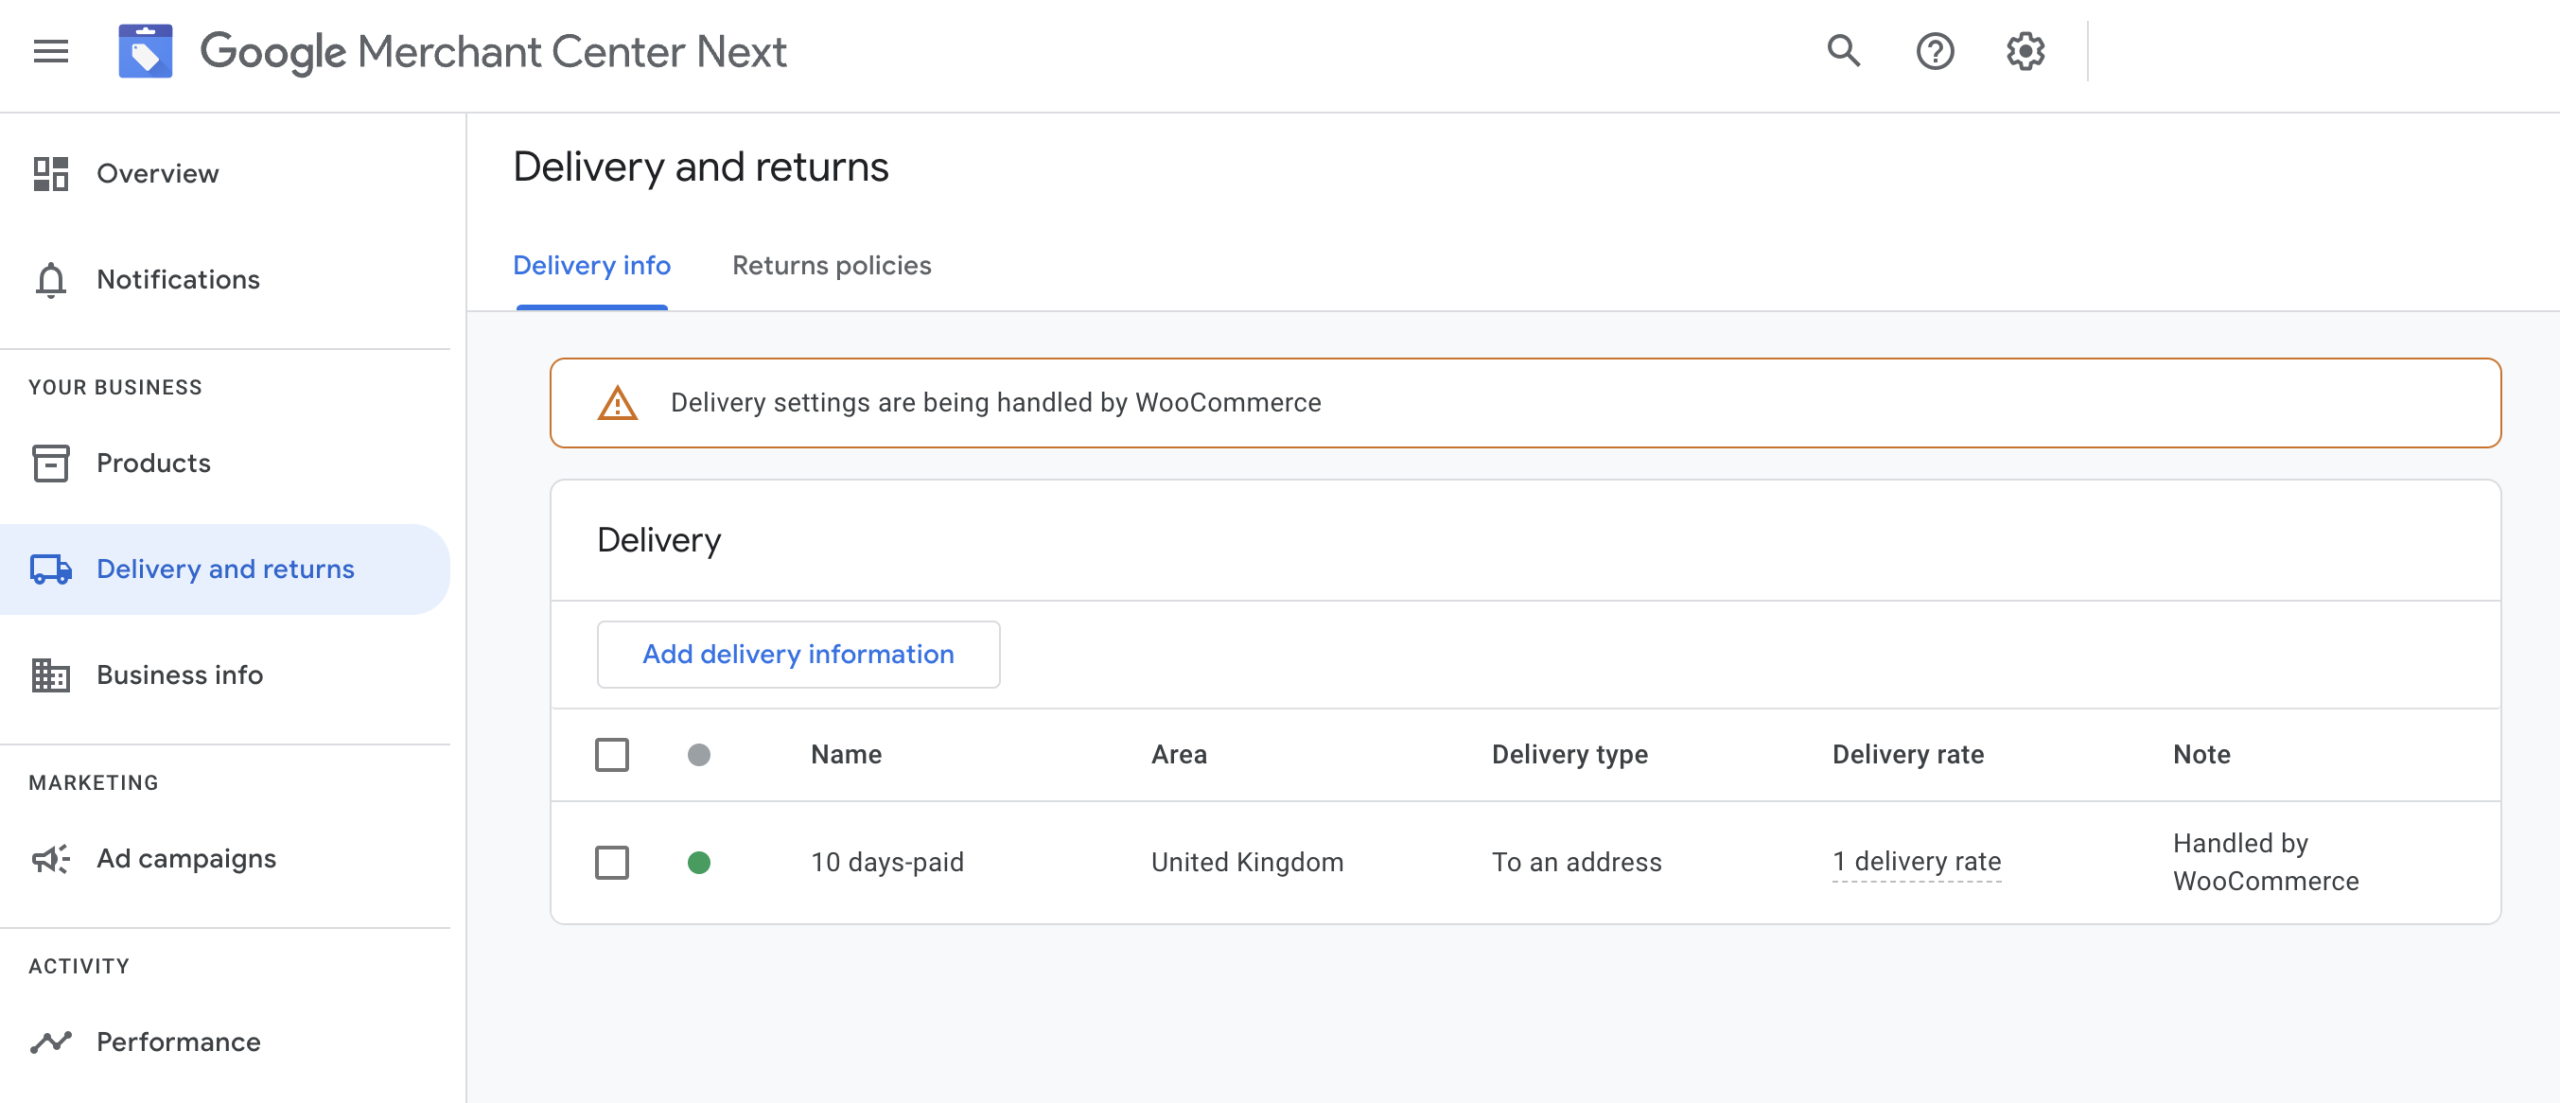 Screen shot of the Delivery tab in Google Merchant Center Next interface